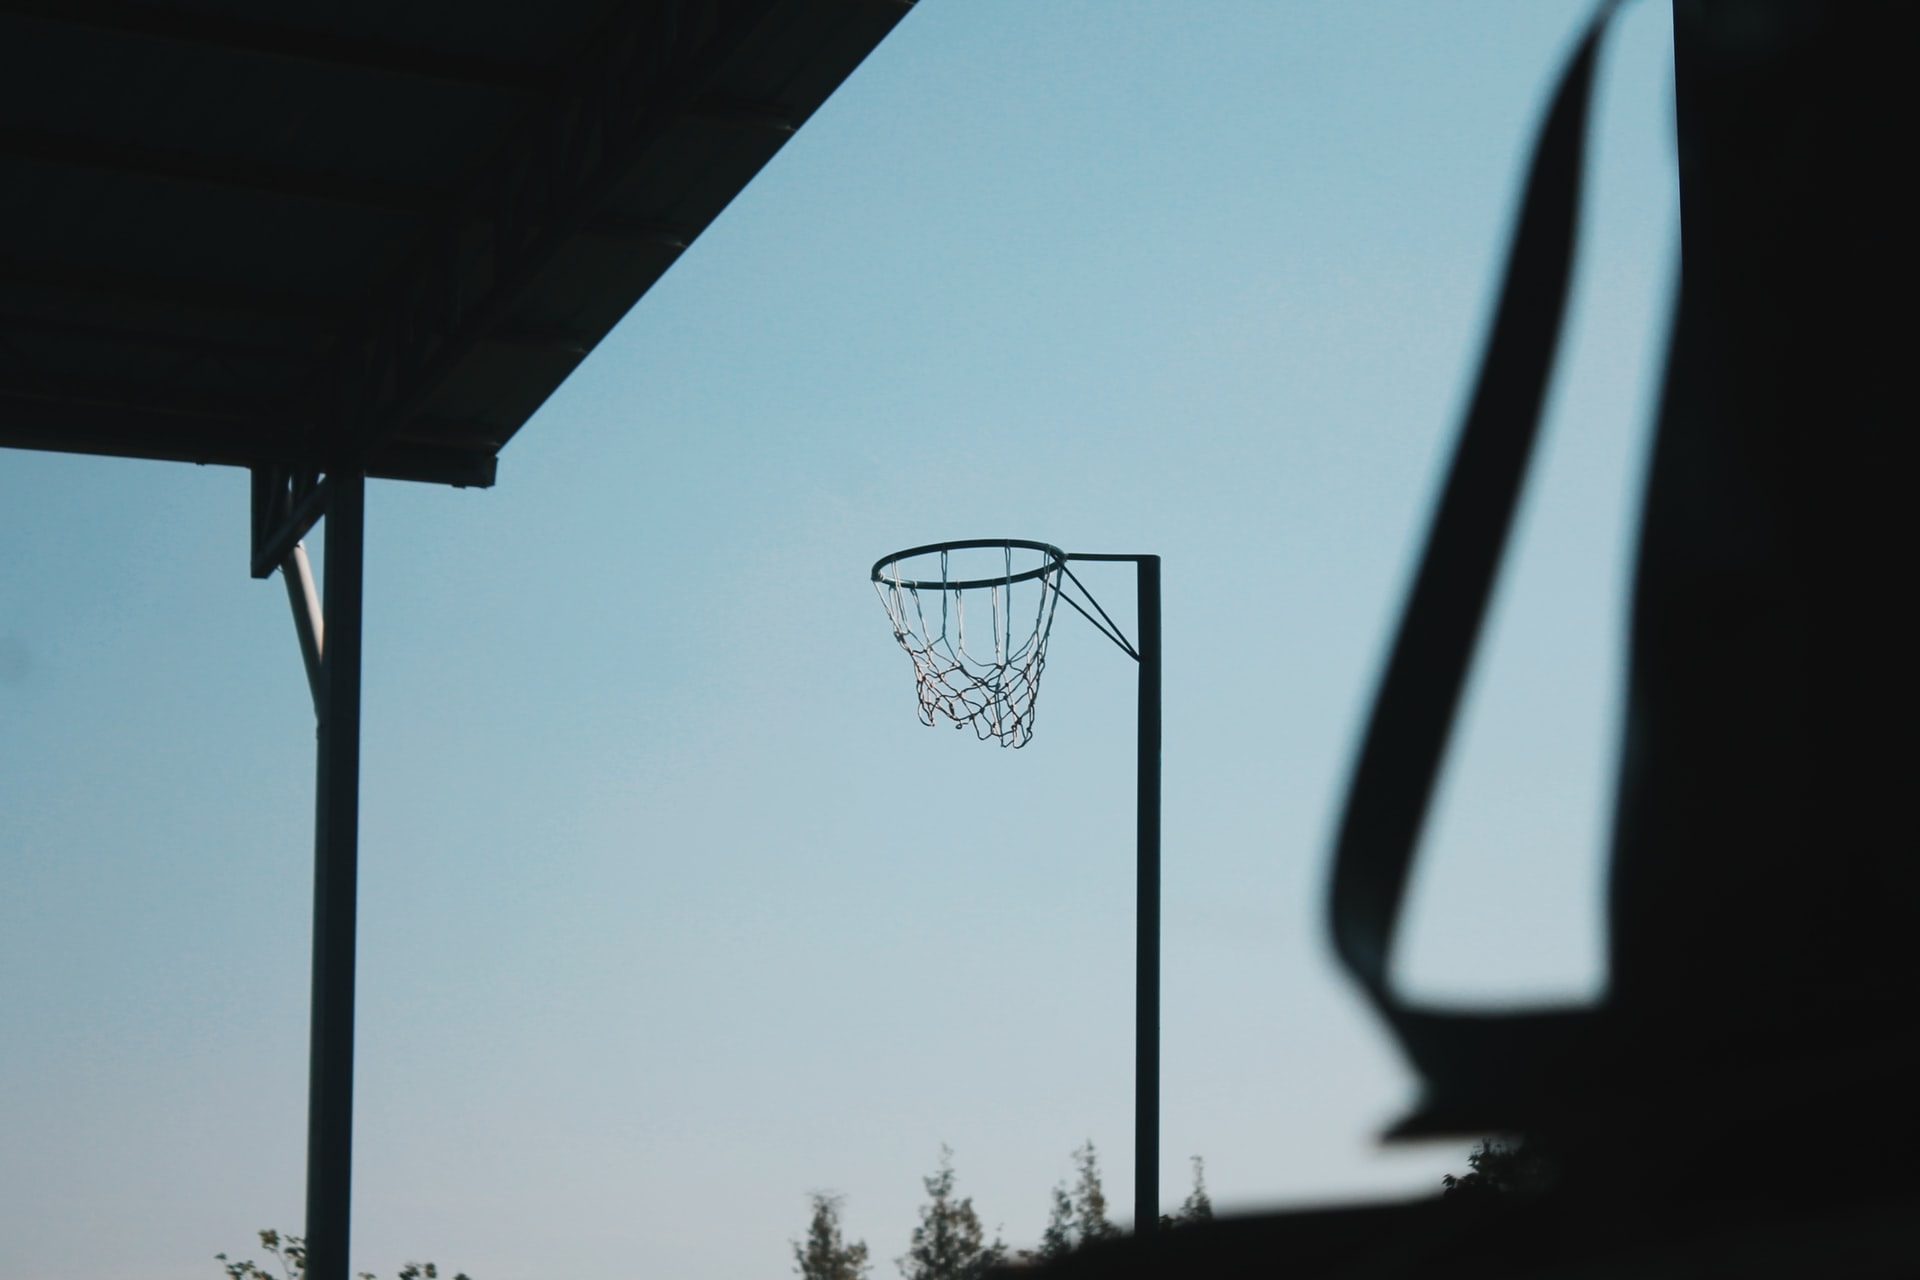 What Are Some Similarities Between Netball and Basketball